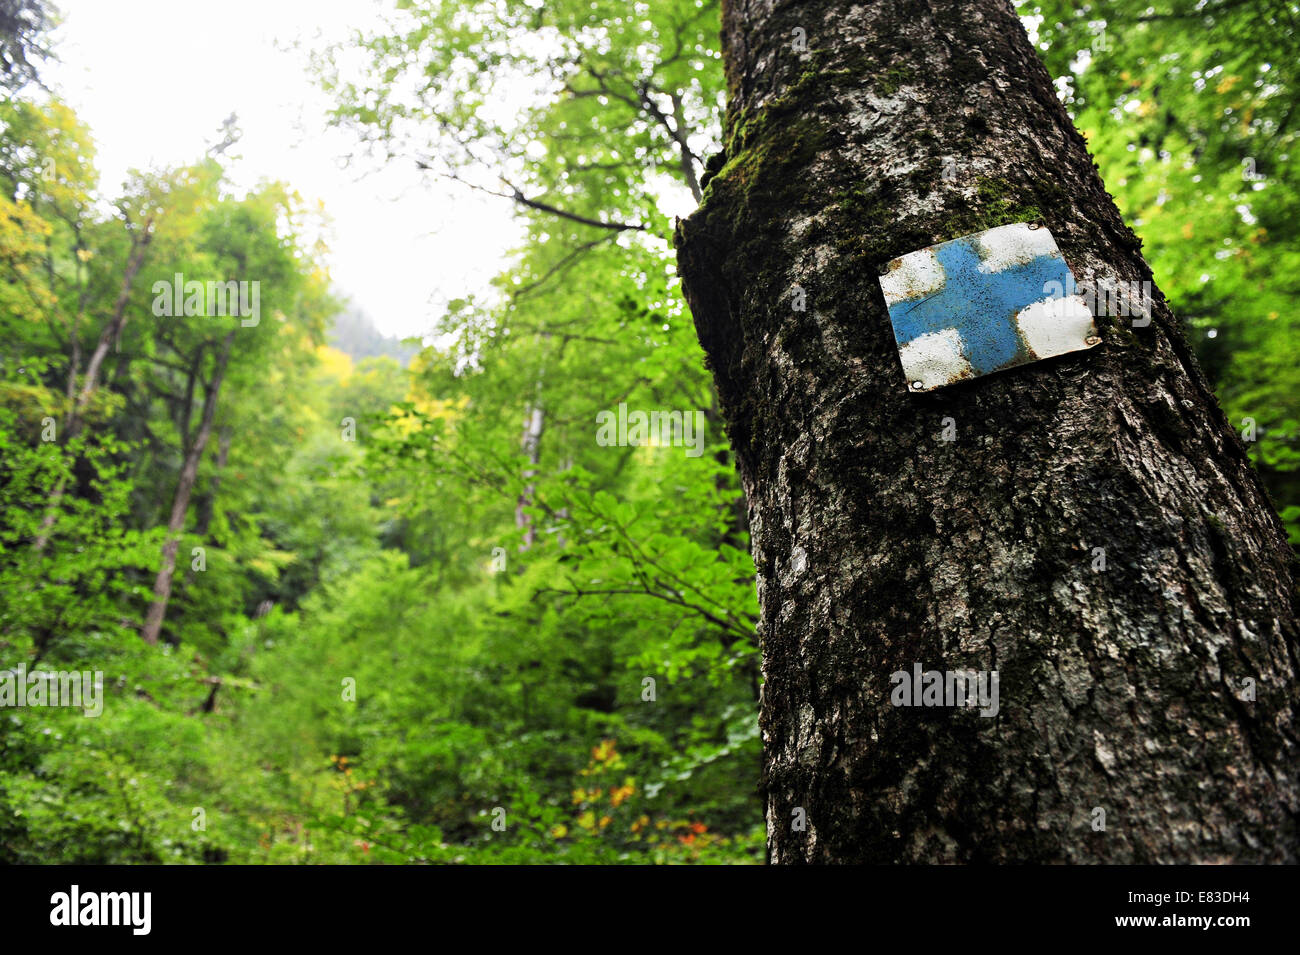 Blue cross symbol marking a tourist hiking route on a tree in the forest Stock Photo